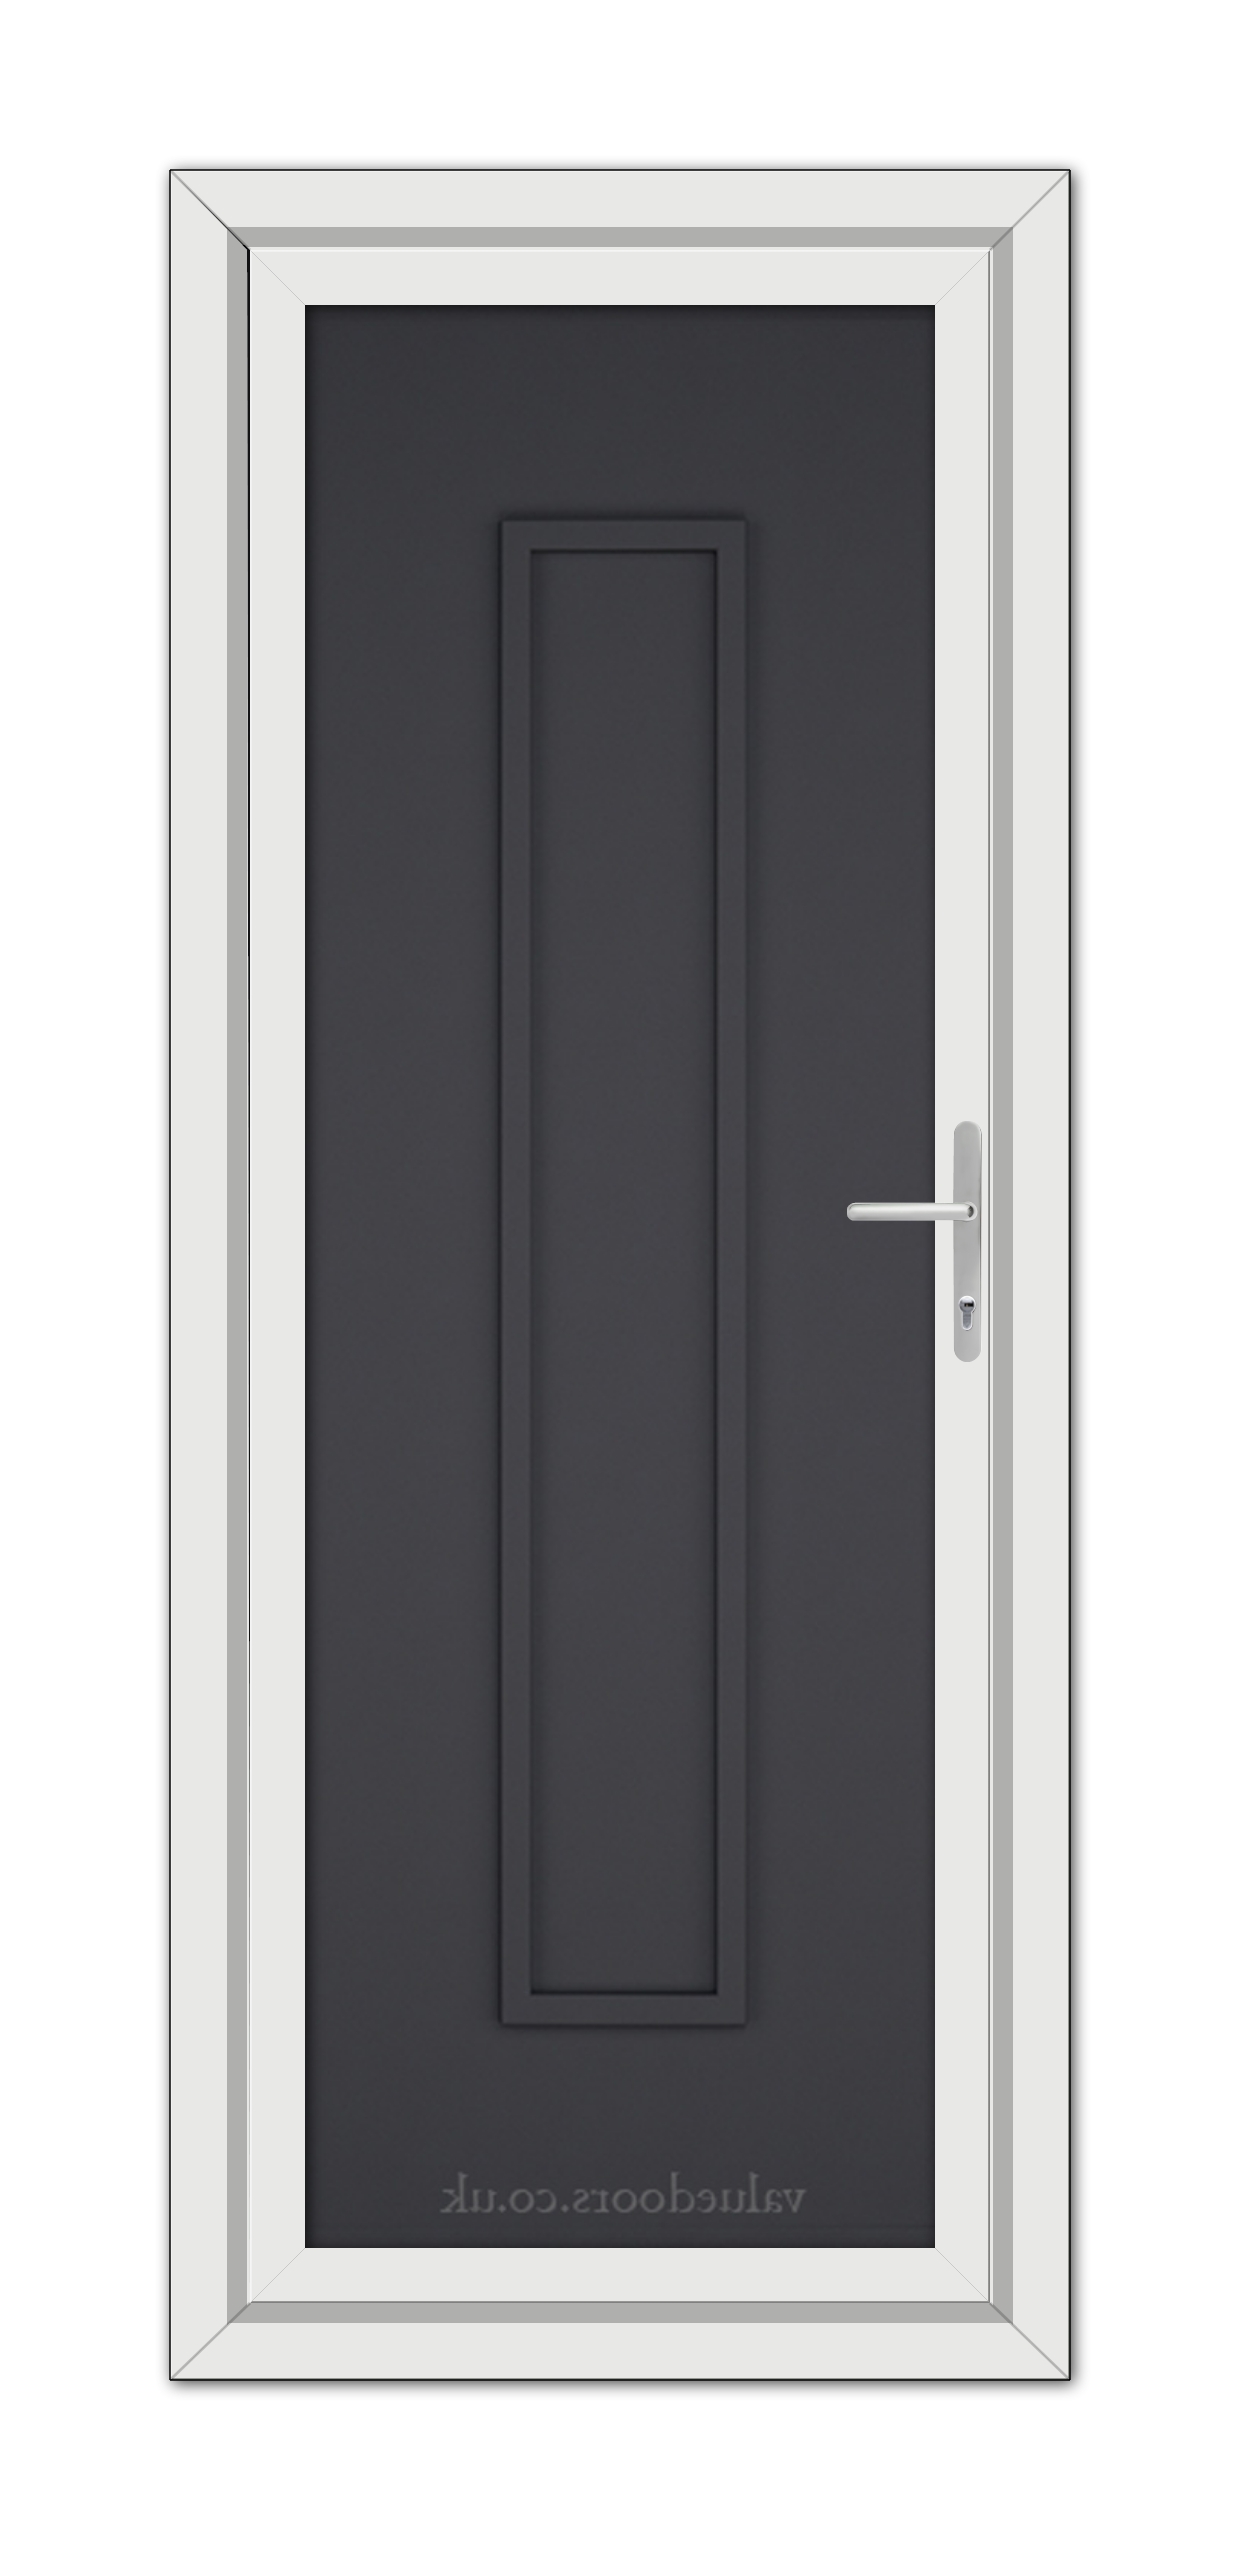 Grey Modern 5101 Solid uPVC Door with a vertical handle, set within white frame, viewed from the front.